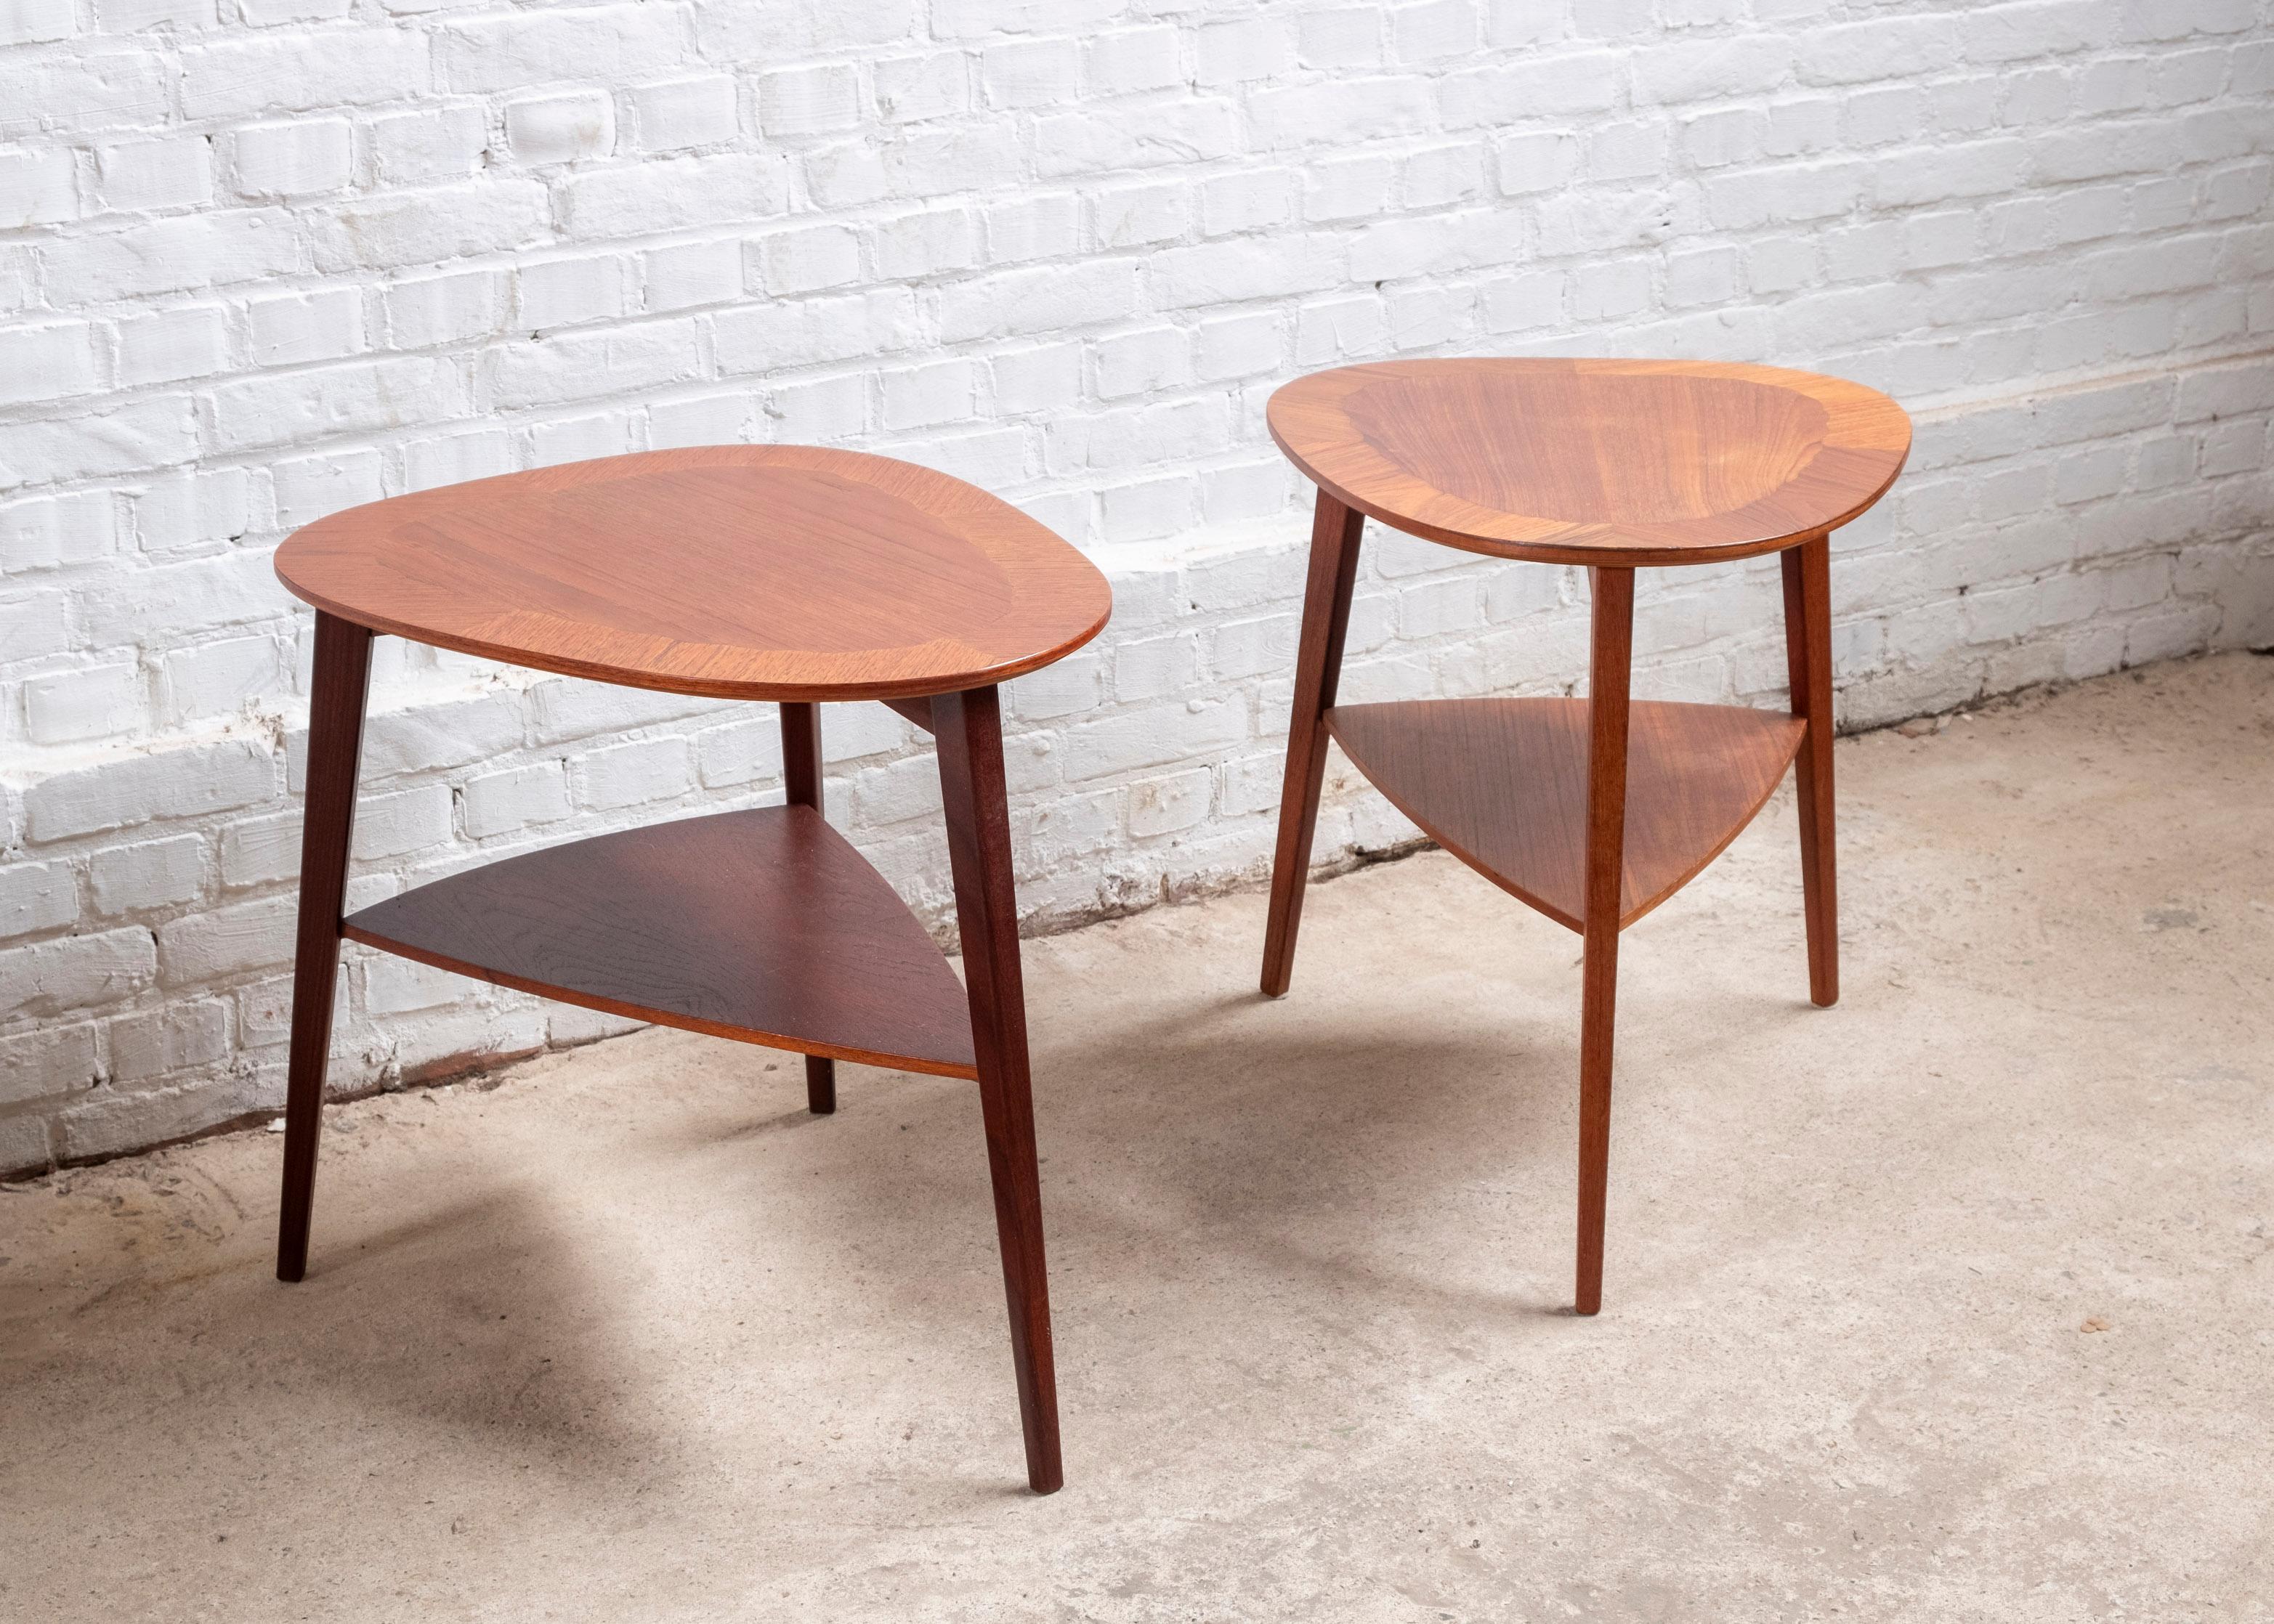 A pair of Danish modern teak end tables by Holger Georg Jensen for Kubus in Denmark. Produced in the 1960s
The table is beautifully crafted, the top shows quartered border of contrasting grained teak marquetry, with secondary suspended shelf on